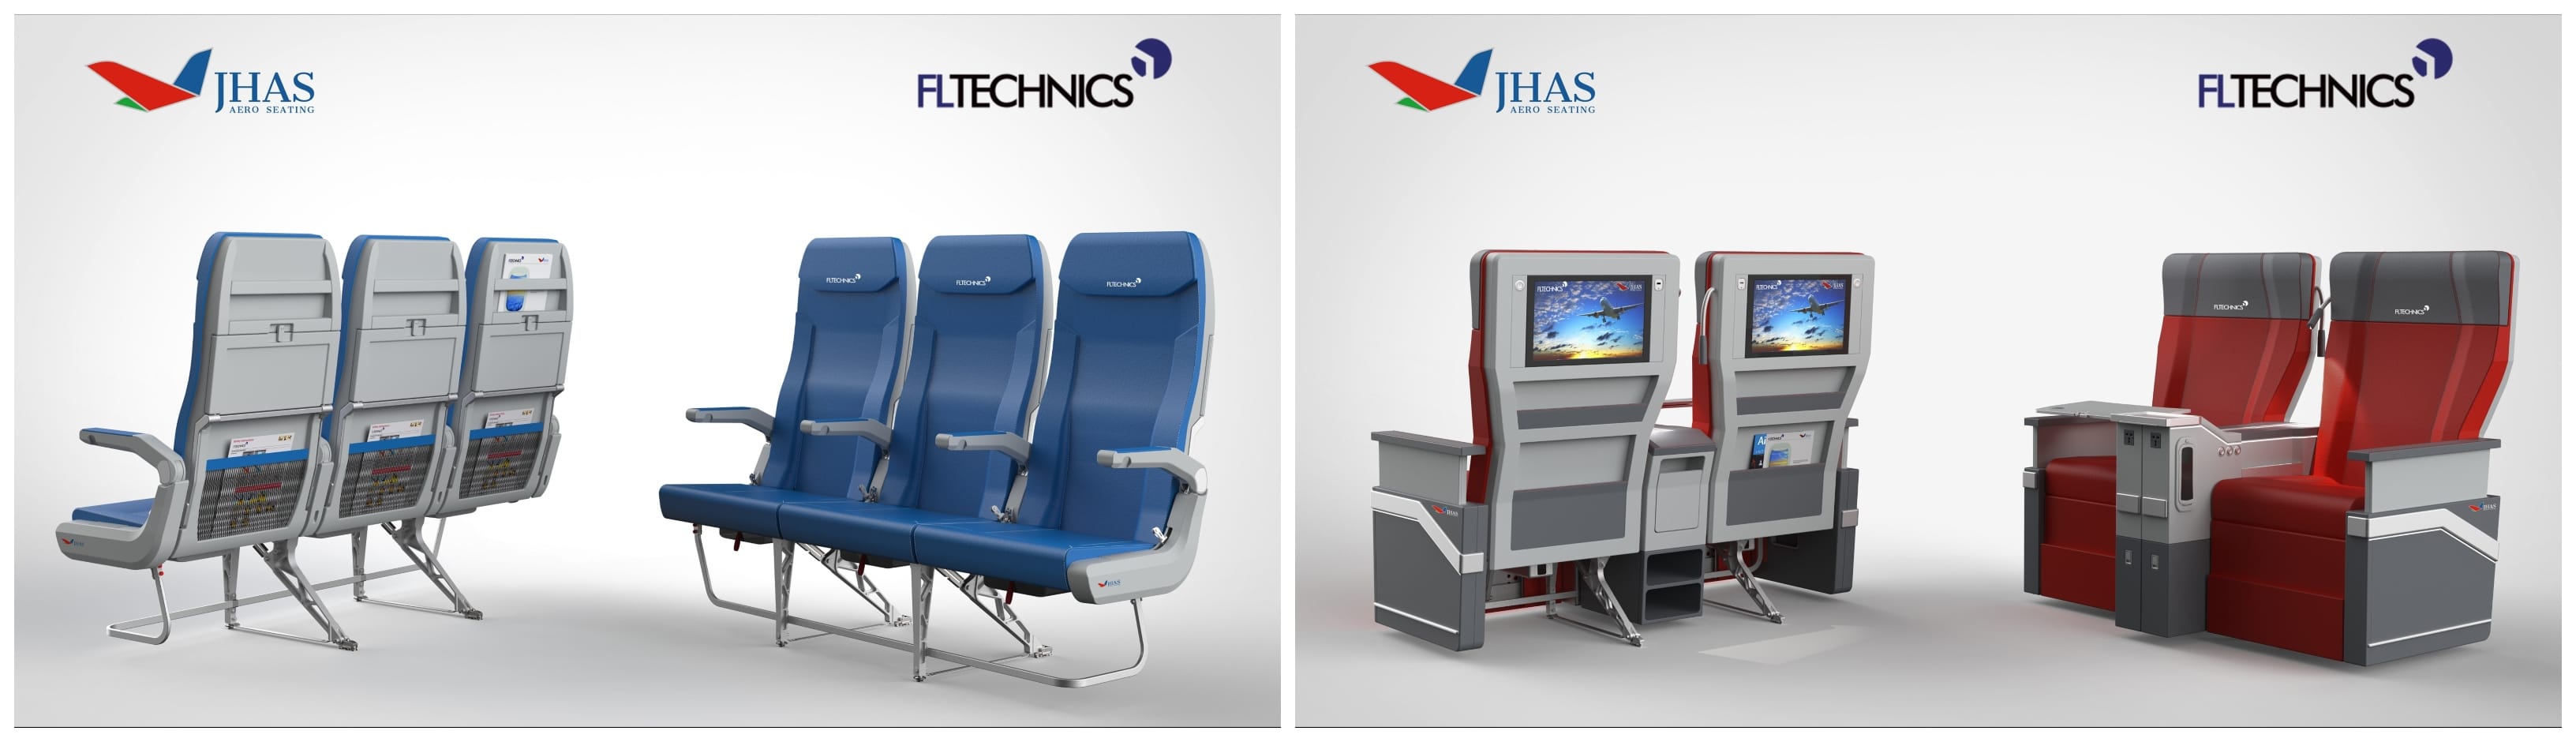 FL Technics, a global provider of integrated aircraft maintenance, repair and overhaul services announces an exclusive partnership with JHAS, an Italian aircraft seating and interior company. “JHAS provides different, tailor-made solutions for aircraft interiors. This is not usual in aviation industry as we are looking for a breakthrough out of standardized seating environment. We are glad that JHAS chose us as their exclusive partners as this is a great opportunity for FL Technics also, giving us an upper-hand in our services,” says Zilvinas Lapinskas, CEO at FL Technics. Since the beginning of this cooperation, FL Technics will be an official representative of JHAS in Europe, Africa, Middle East, CIS and Russian regions, as well as Asia Pacific region. FL Technics will act as exclusive seller and promoter of economy, business and first class seats so to cover all the typology of products for aircraft cabin interiors classes. “We are very proud to be a partner of one of the most energetic players in MRO market. It’s a great opportunity to introduce unique products for each client and to show our capacity through expertise in the market where every need of our customers will be reached, thanks to the synergy with FL Technics,” says Mario Schisa, CEO at JHAS. FL Technics continued their global expansion and started implementing its strategic goals by amplifying their operations in Asia Pacific region and China. Just recently, FL Technics created a joint-venture in China, opened a warehouse in Singapore and expanded their MRO activities in Indonesia by receiving an FAA Part-145 certificate for the subsidiary FL Technics Indonesia. The deal with JHAS allows FL Technics to suggest tailor-made solutions for present and future clients in Asia Pacific region and China. FL Technics is a global provider of aircraft maintenance, repair and overhaul (MRO) services. Company specializes in base & line maintenance, spare parts & component support, engine, APU & LG management, full aircraft engineering, technical training. FL Technics is an EASA Part-145, Part-M, Part-147, Part-21 and FAA 145 (Indonesia) certified company. FL Technics is a member of the Avia Solutions Group family. JHAS is a design and production company of seats and interiors in aviation. The company’s headquarters with Design, Style, Certification and R&D departments are located in Italy. Most advanced instruments for analysis and simulations (FEM, 3D virtual simulator) are available for the customers. In China the company has a prototype & production assembly site of 90.000 sq.m. JHAS territorial presence in the three sites guarantees support and assistance to customers and OEM all over the world. JHAS is a part of Jiangsu HengSheng Aviation Seats Group.